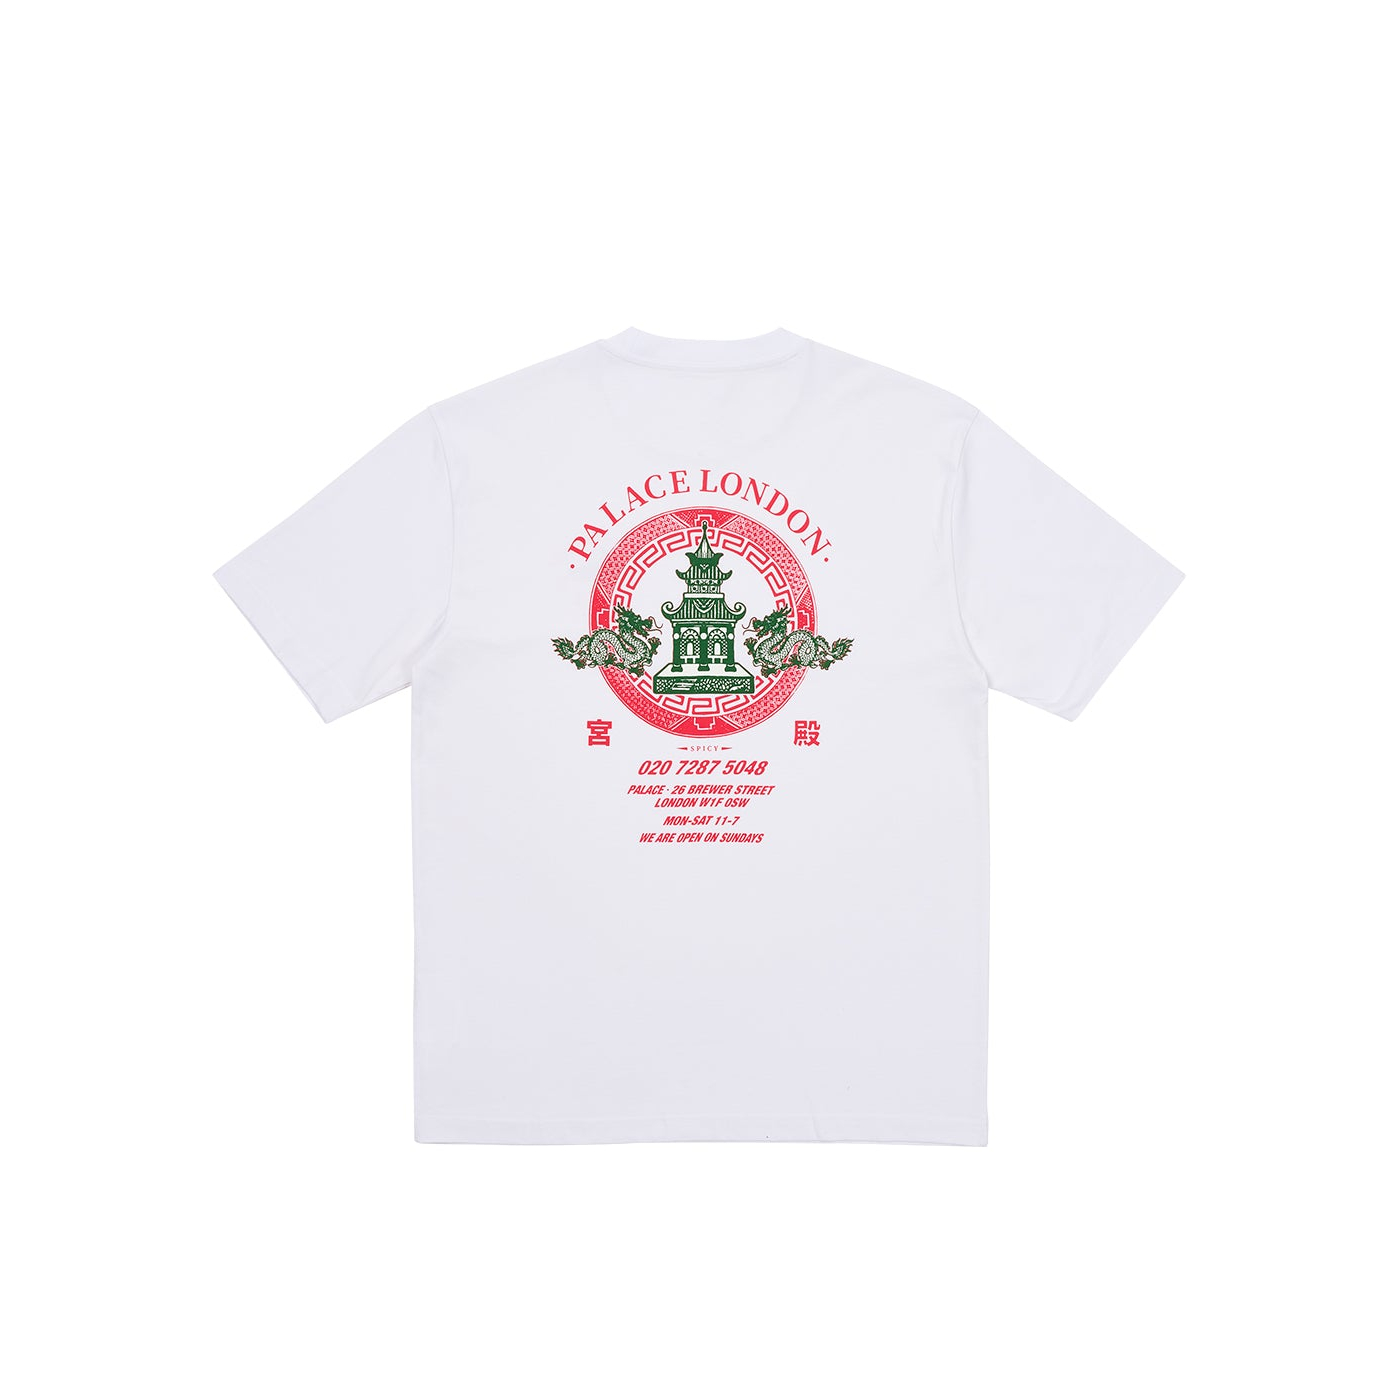 Thumbnail FORTUNATE T-SHIRT WHITE one color